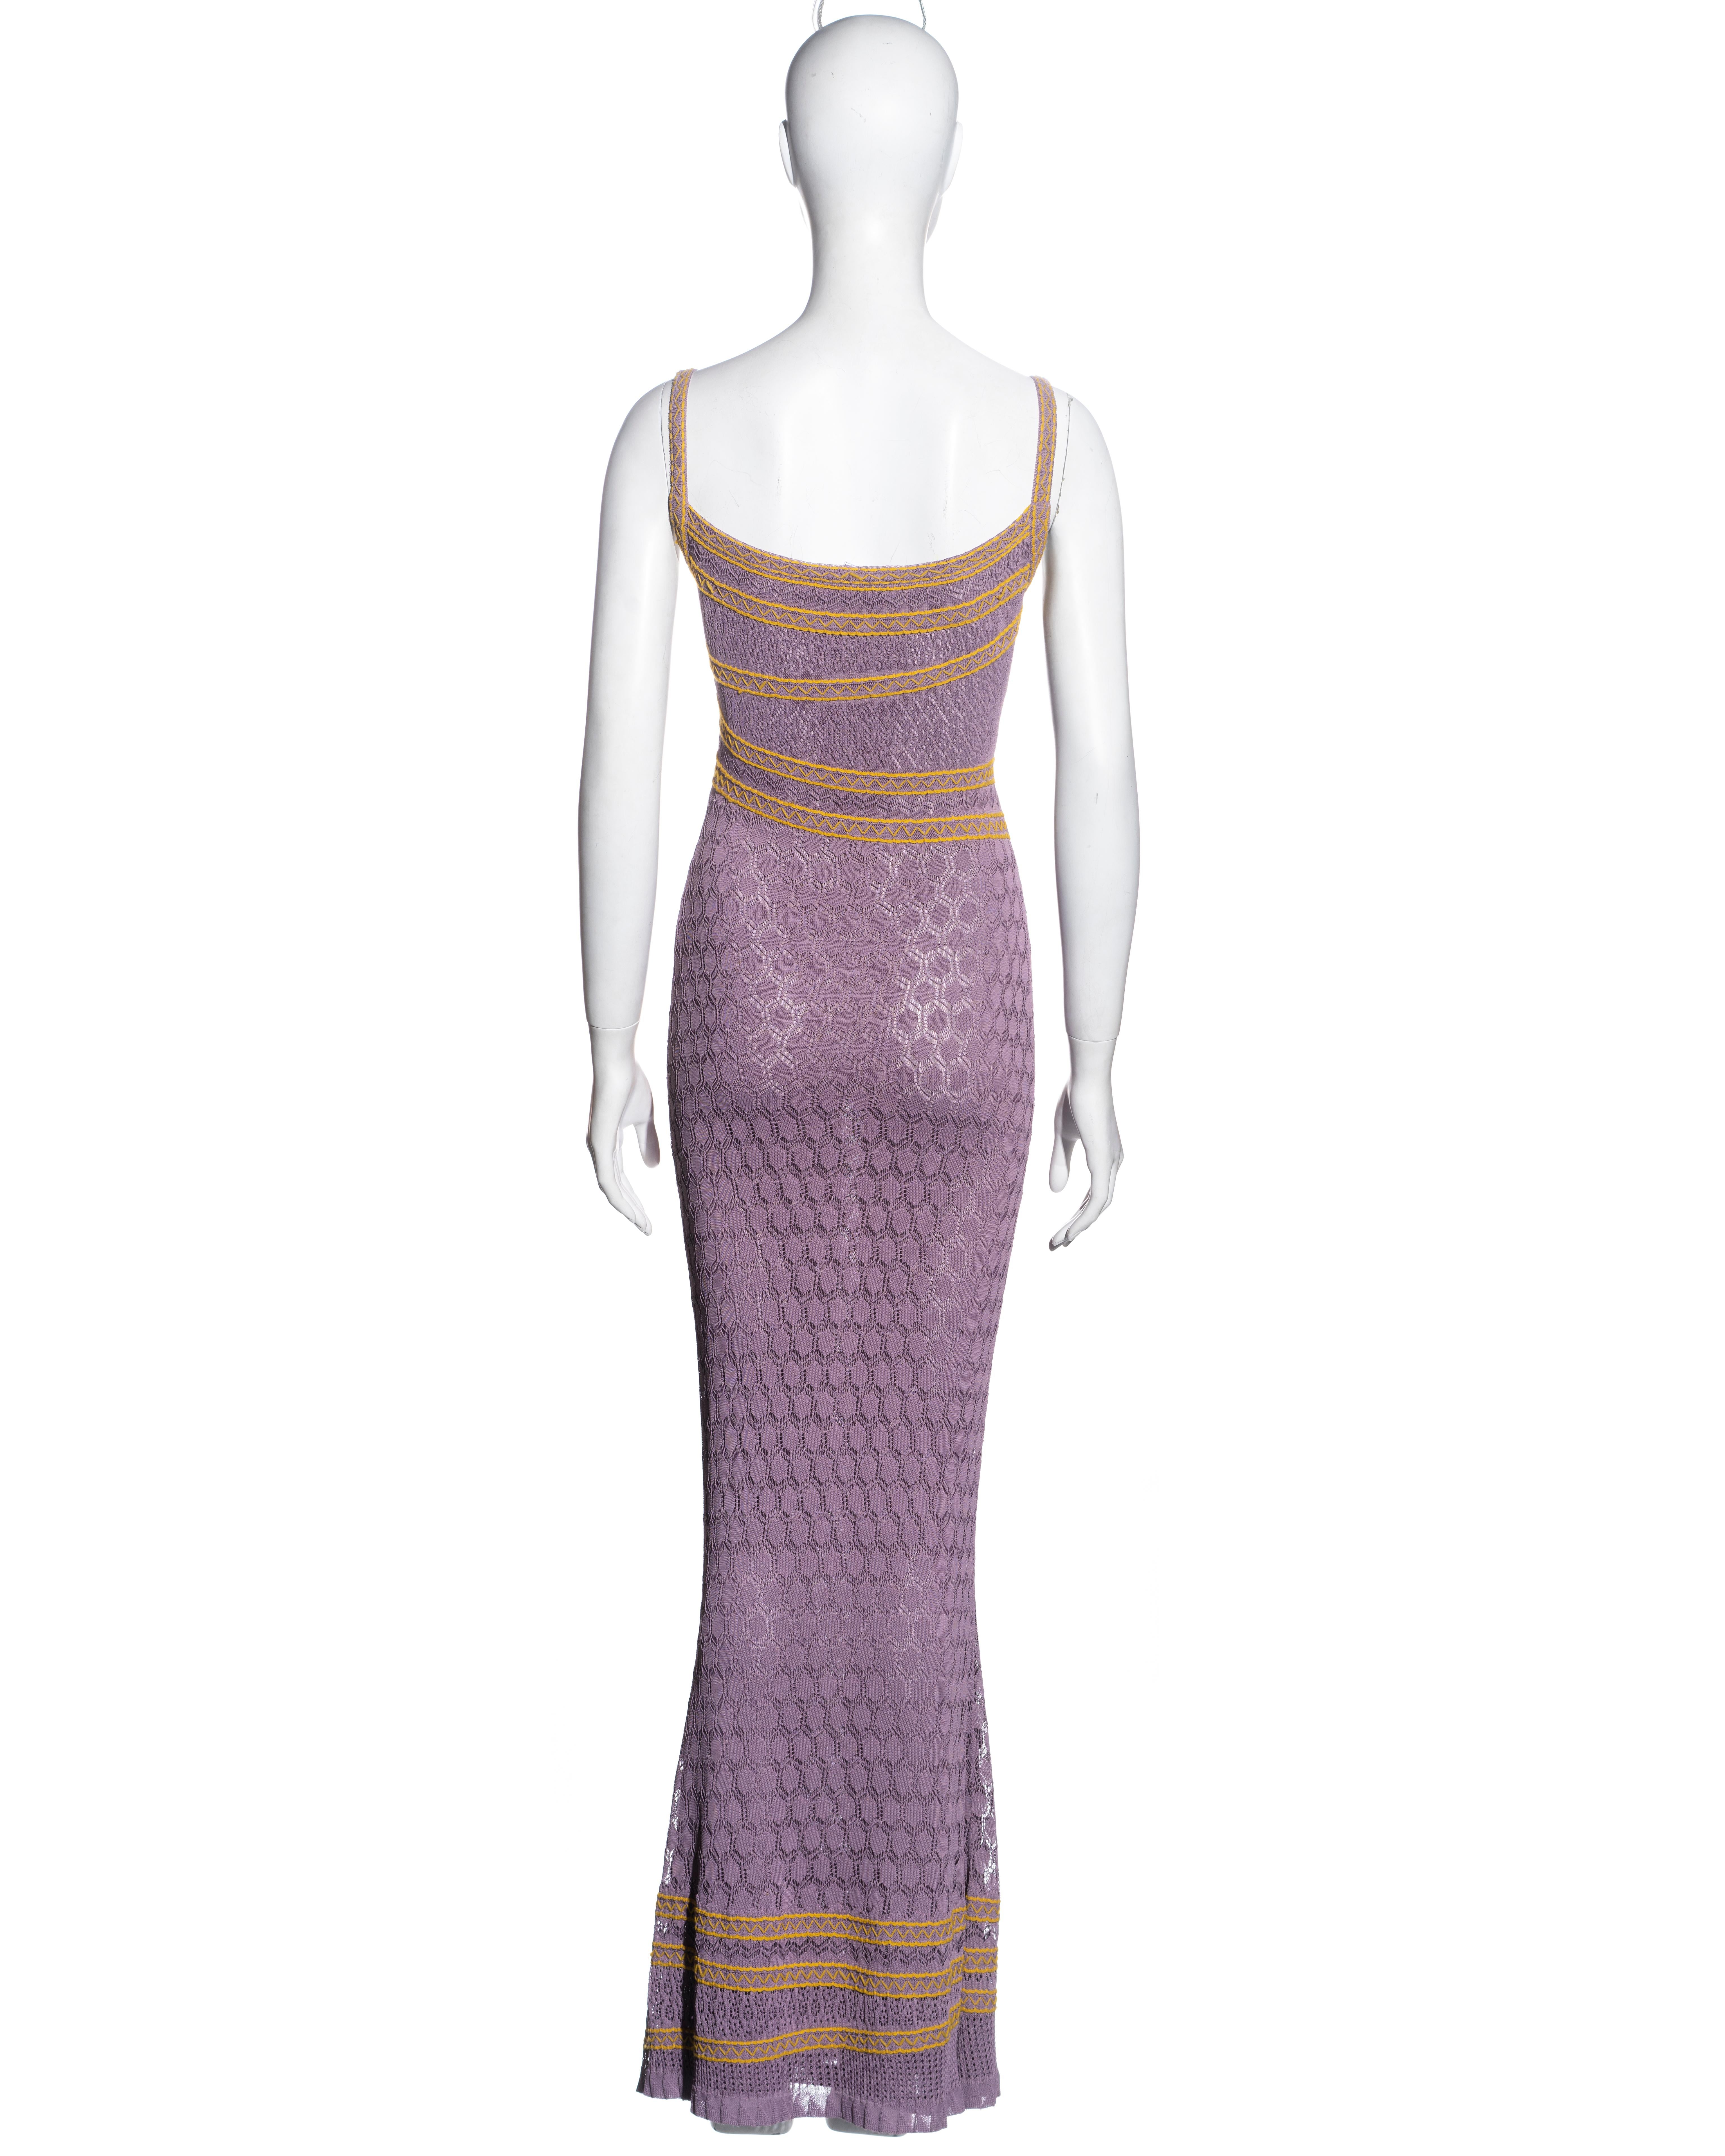 Christian Dior by John Galliano lavender crochet lace maxi dress, ss 2000 For Sale 2